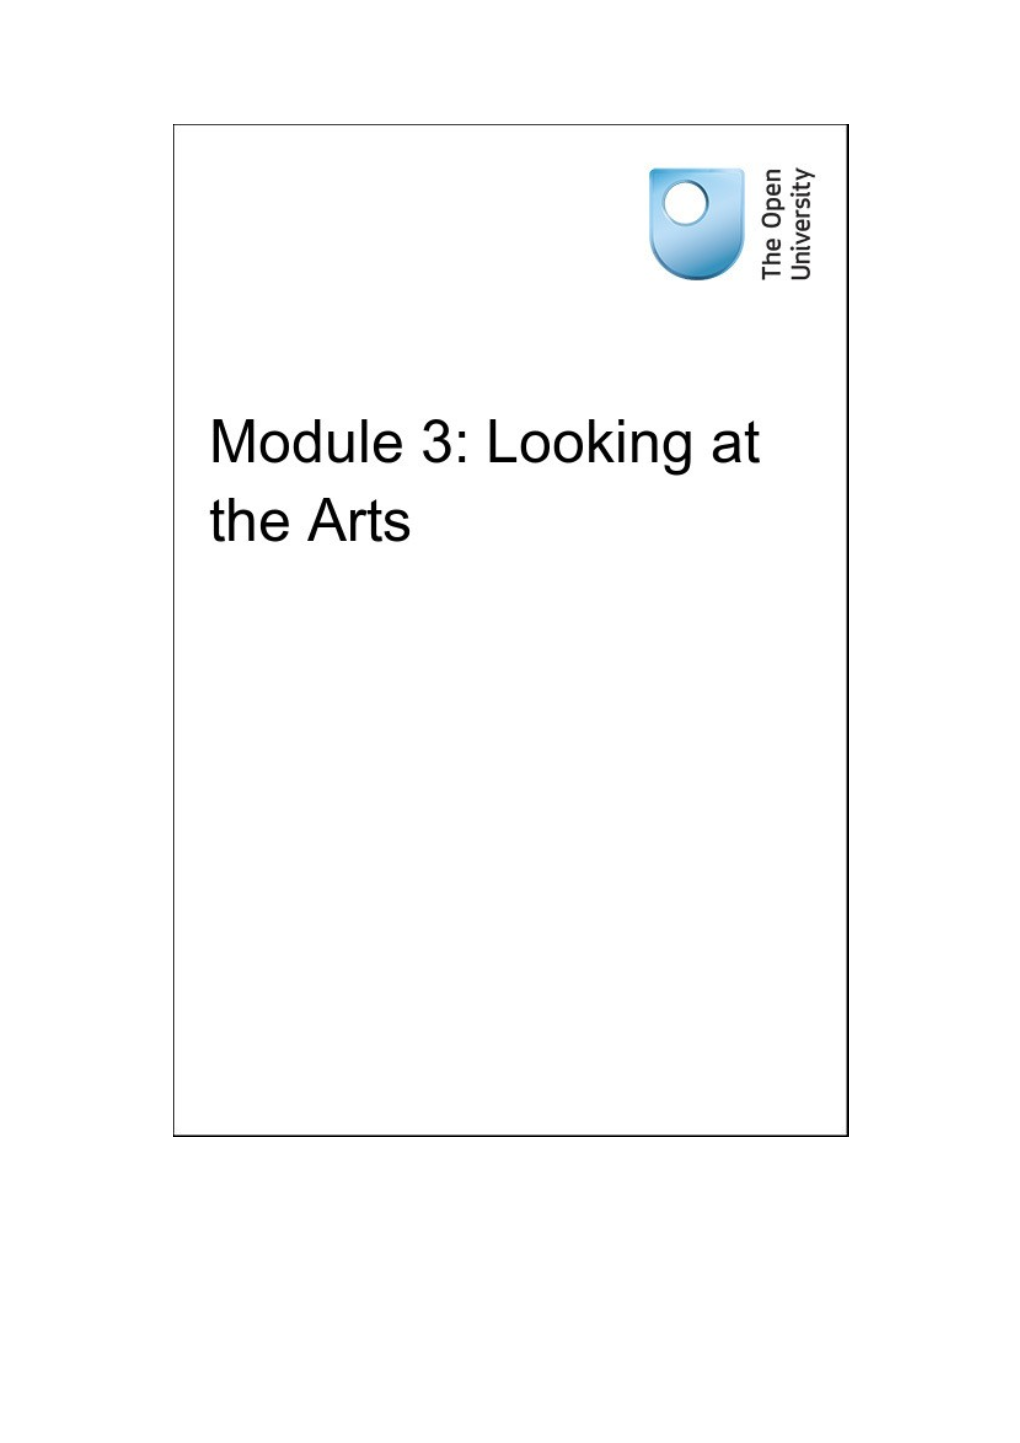 Module 3: Looking at the Arts